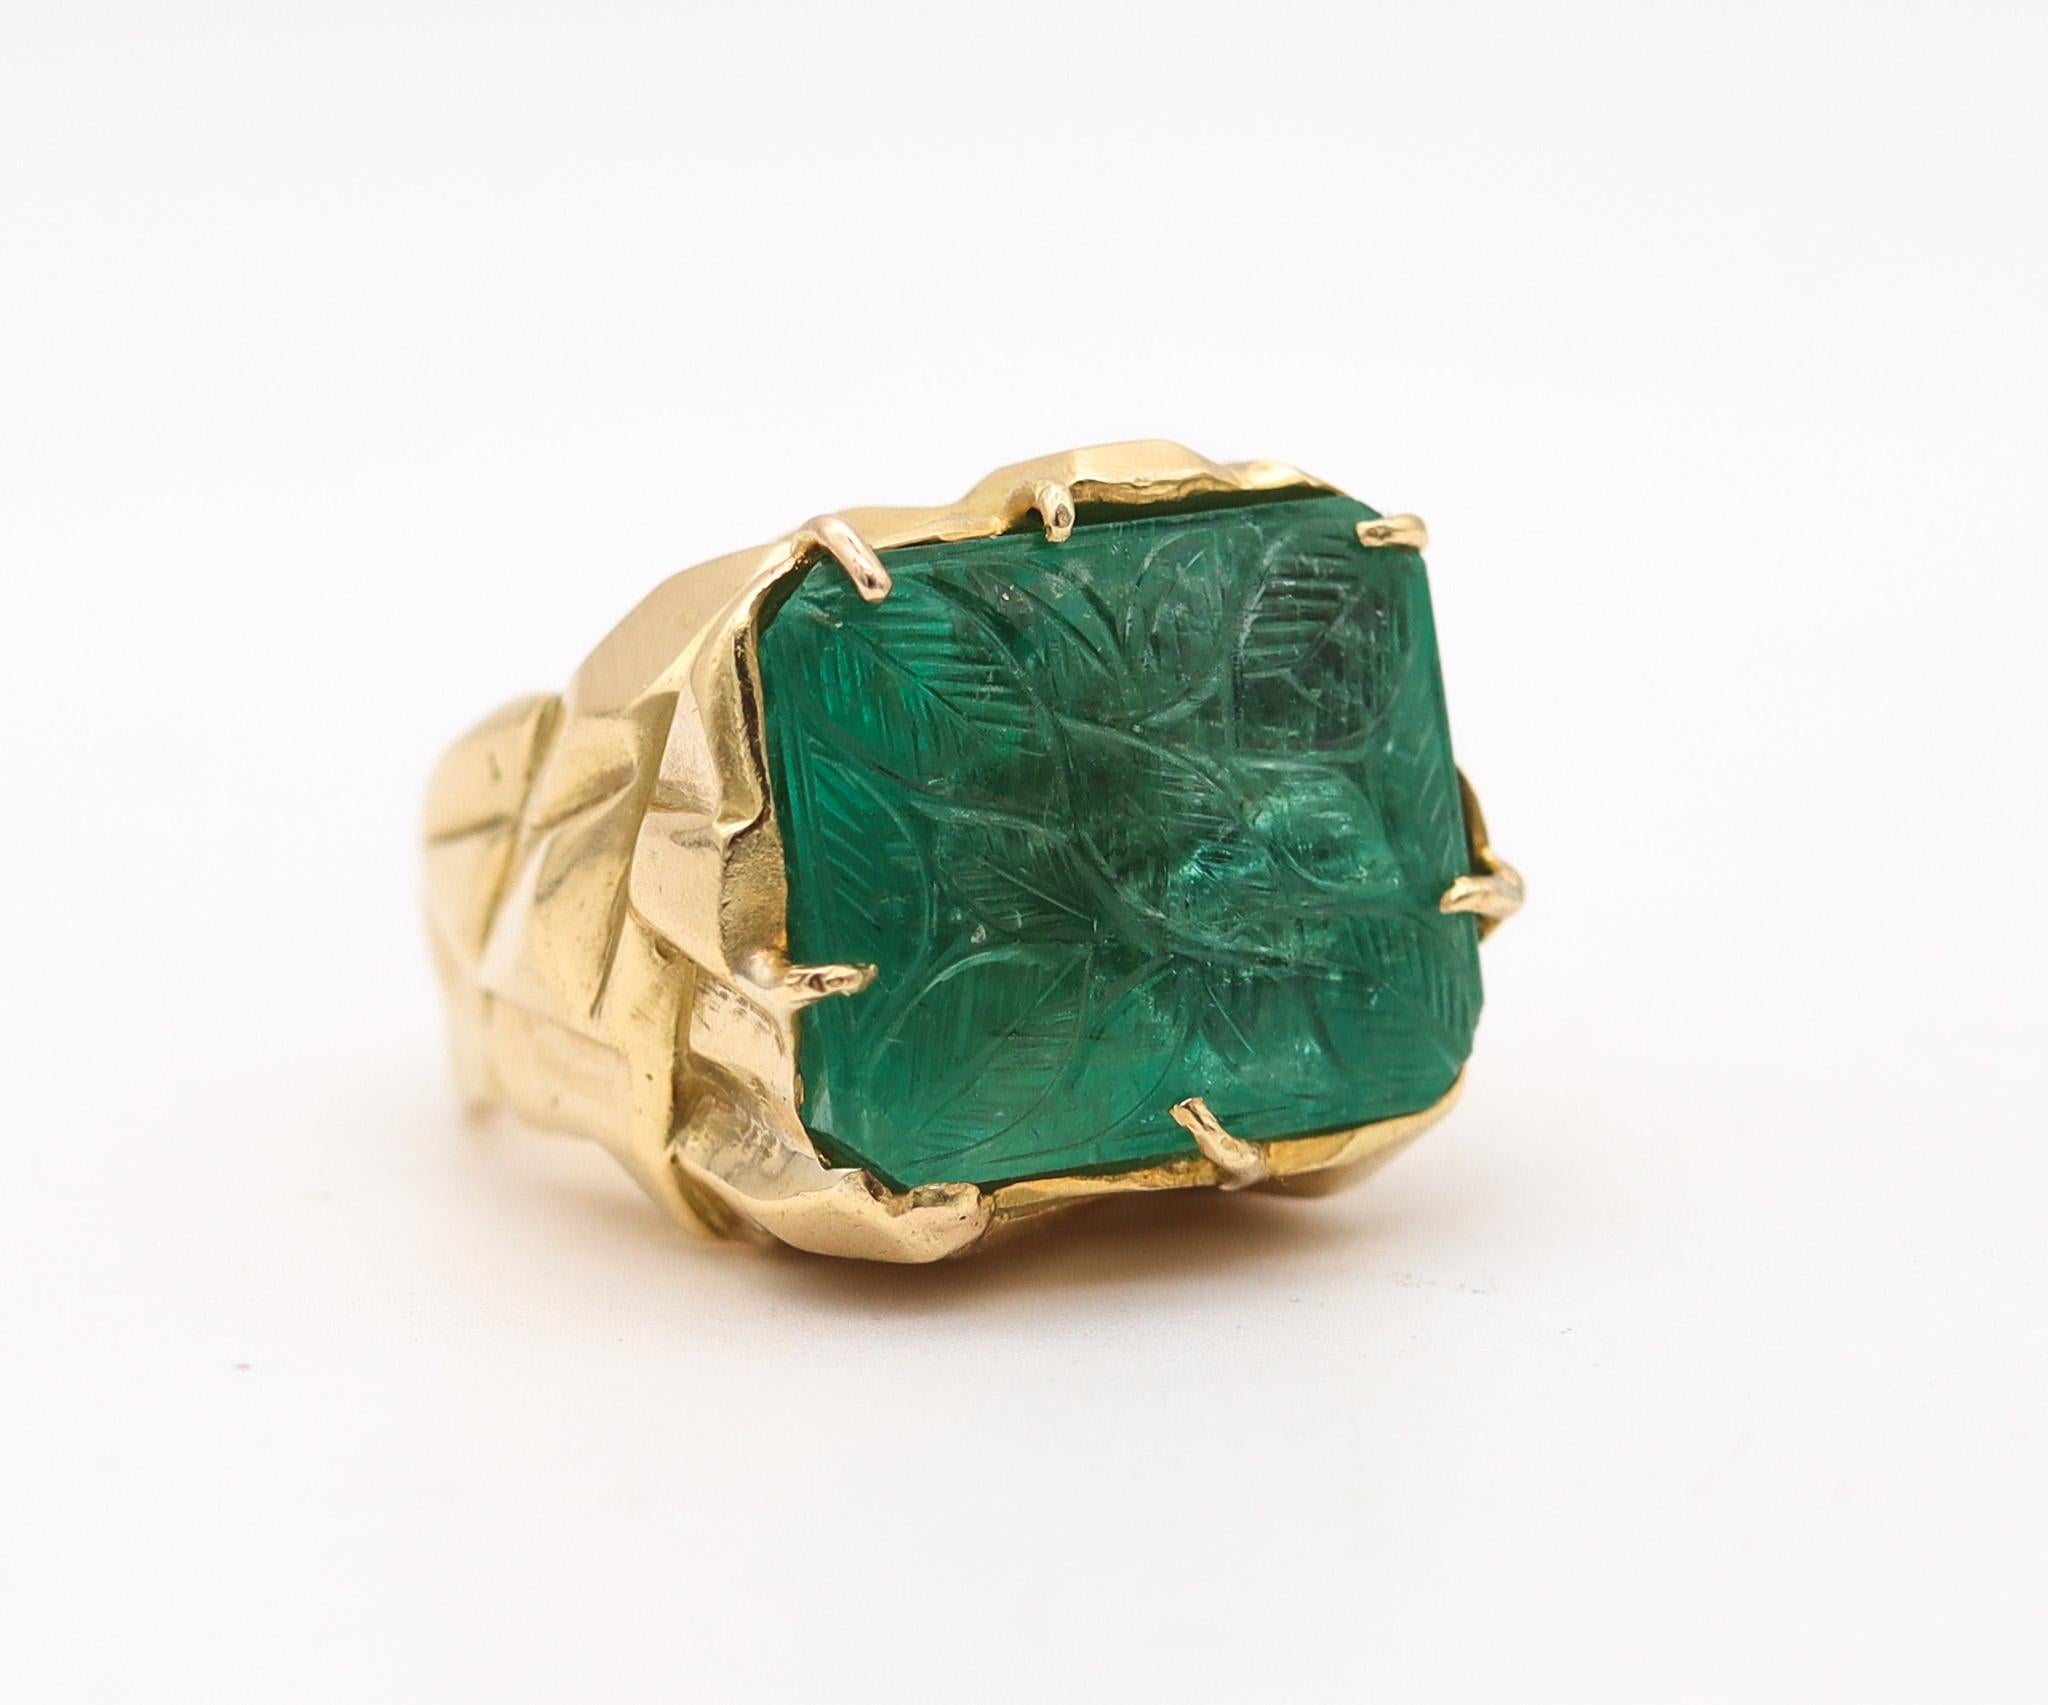 Geometric sculptural ring designed by Arthur King.

An extraordinary one of a kind cocktail ring, created in New York city by the artist and goldsmith Arthur King, back in the 1970. This bold and massive ring is very rare and was most probably a